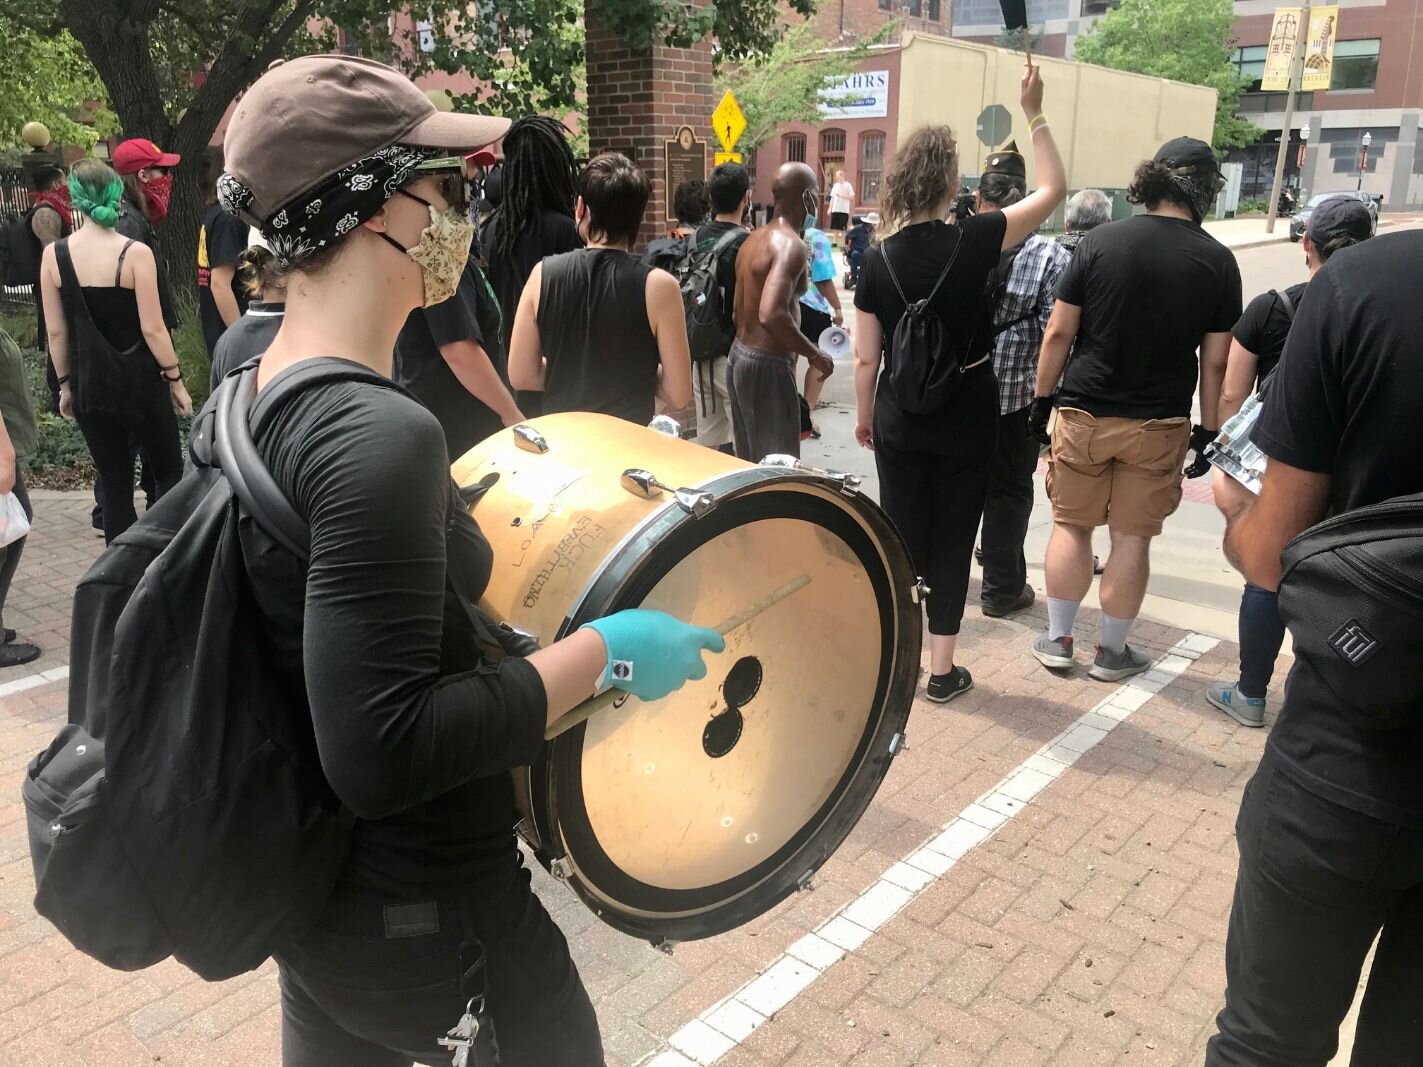 Counter-protesters at Saturday’s Proud Boys protest included a diverse mix with people from a wide age range and many backgrounds.